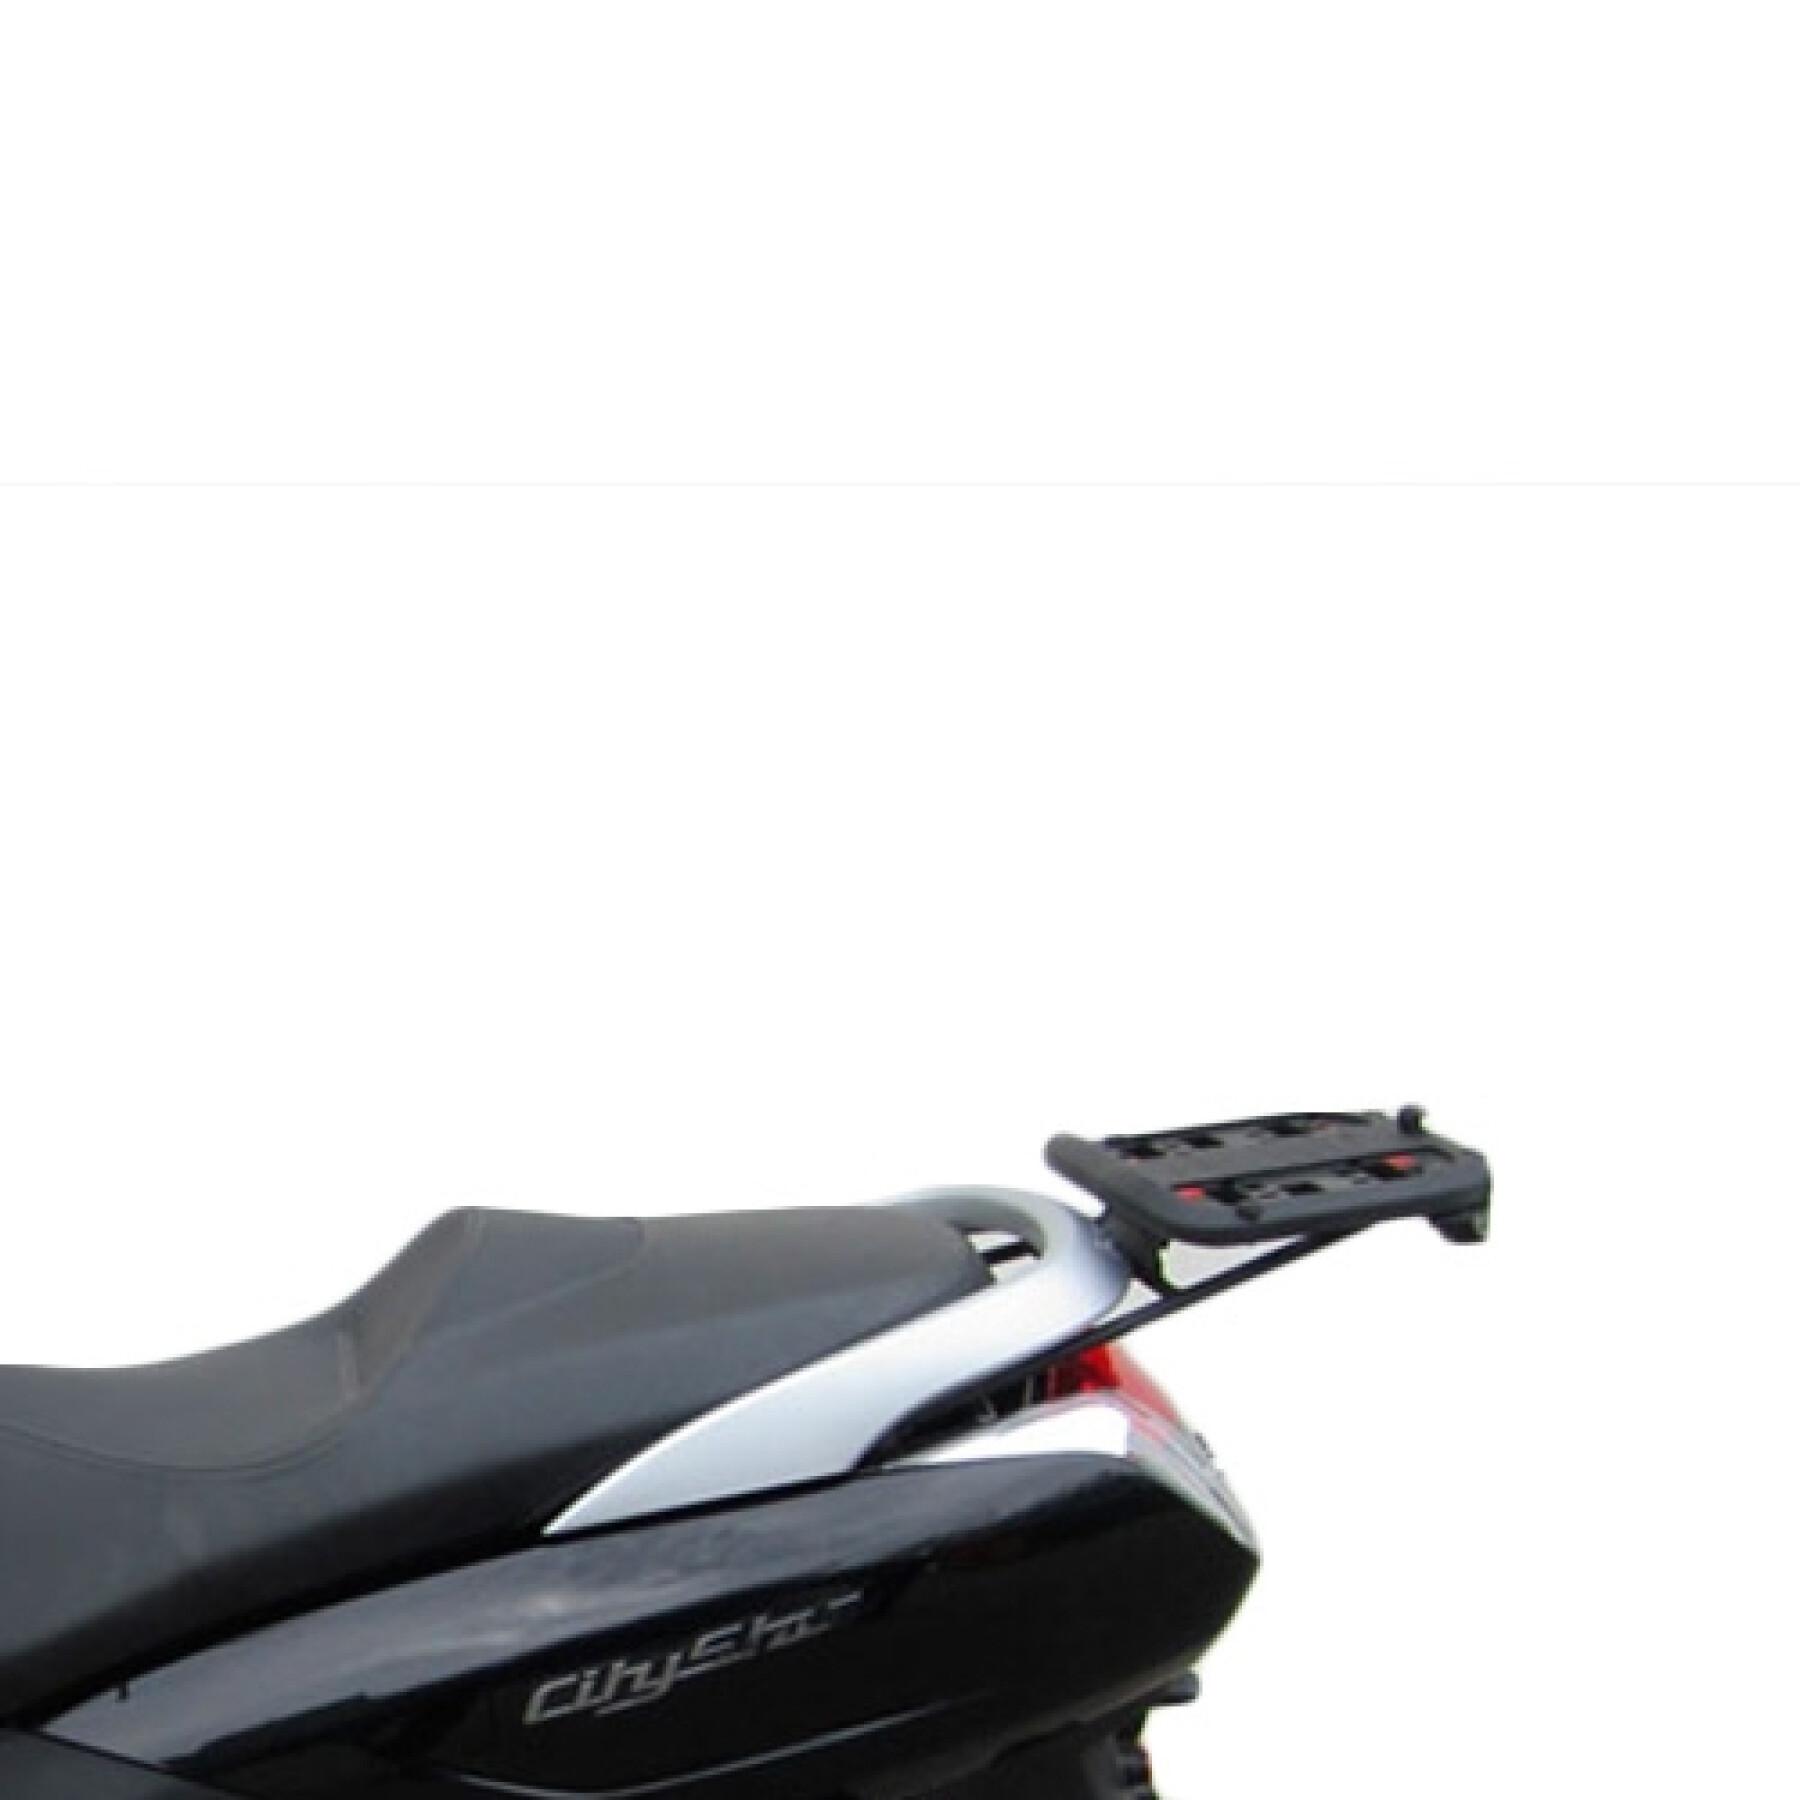 Scooter top case support Shad Peugeot Citystar 125i/200i (12 to 20)